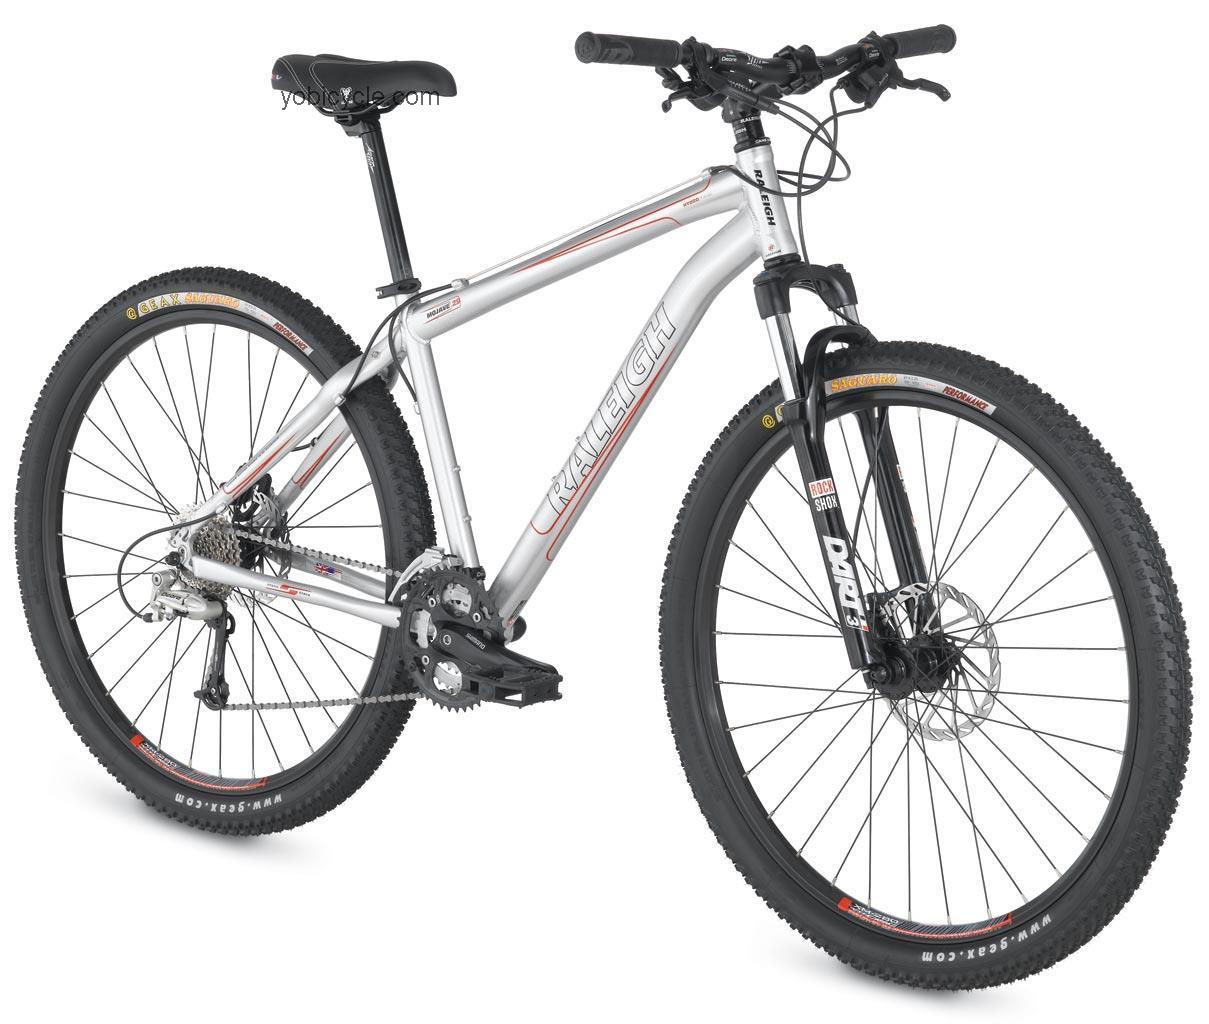 Raleigh Mojave 29 2009 comparison online with competitors